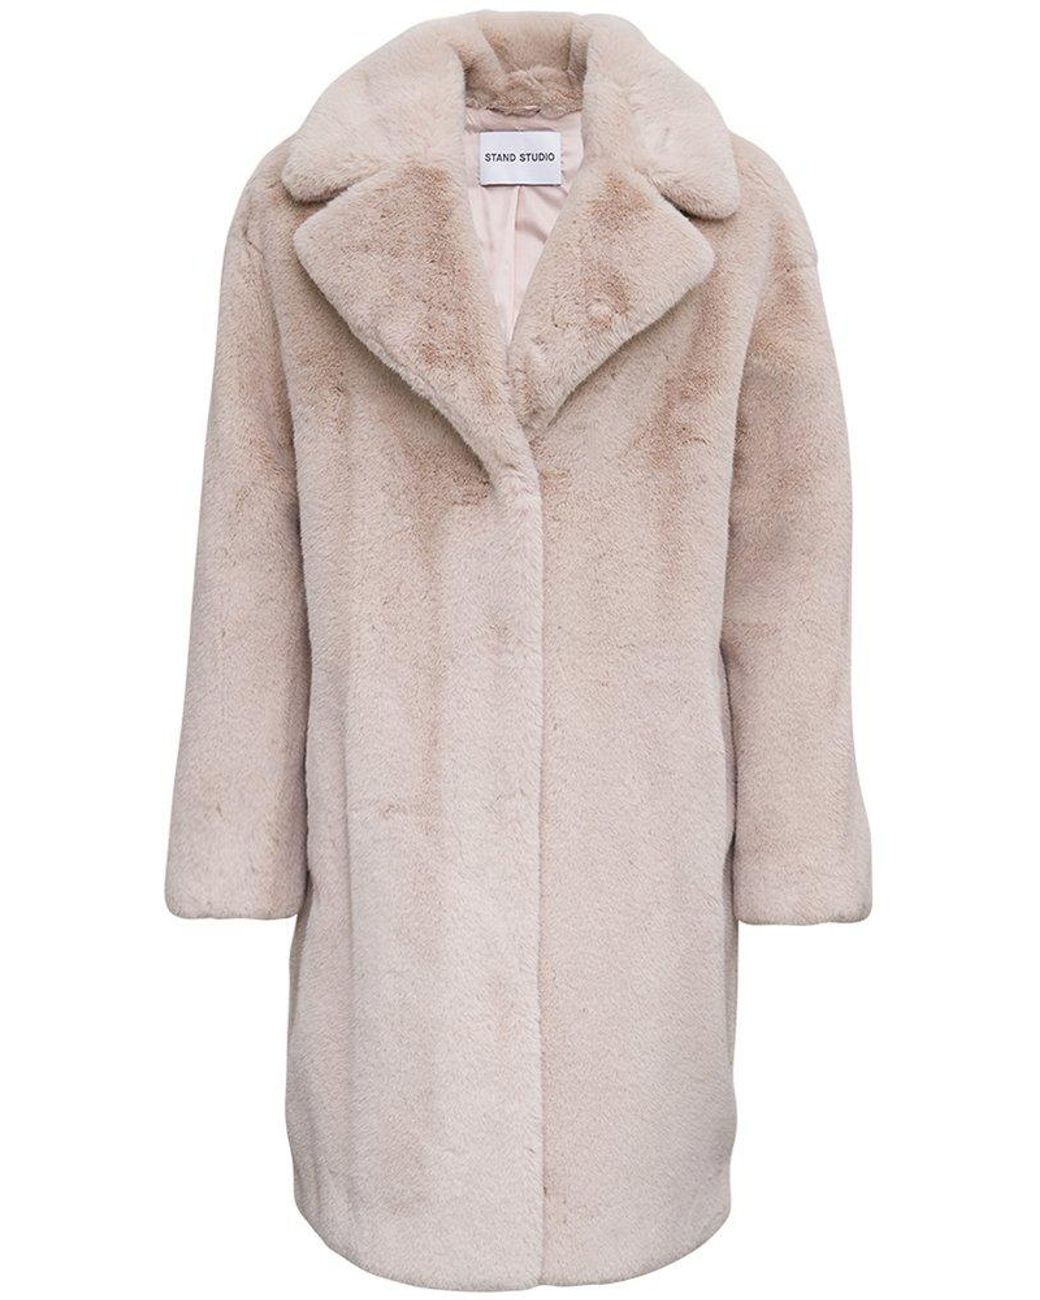 Stand Studio Camille Cocoon Faux Fur Coat in Natural | Lyst